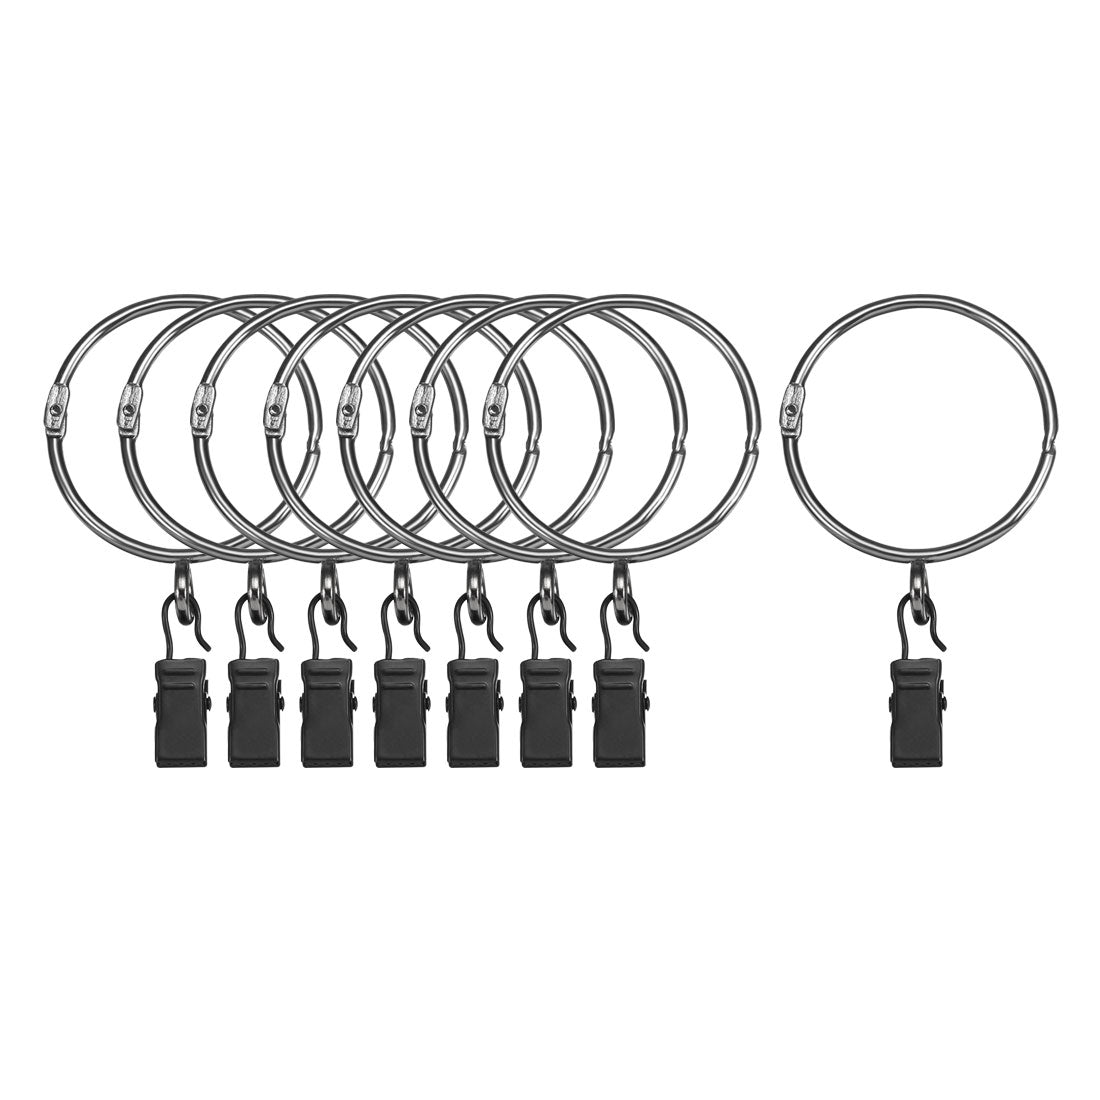 uxcell Uxcell Curtain Rings with Clips Strong Decorative Metal Drapery Shower Rustproof 1.93" Interior Diameter Black 8pcs